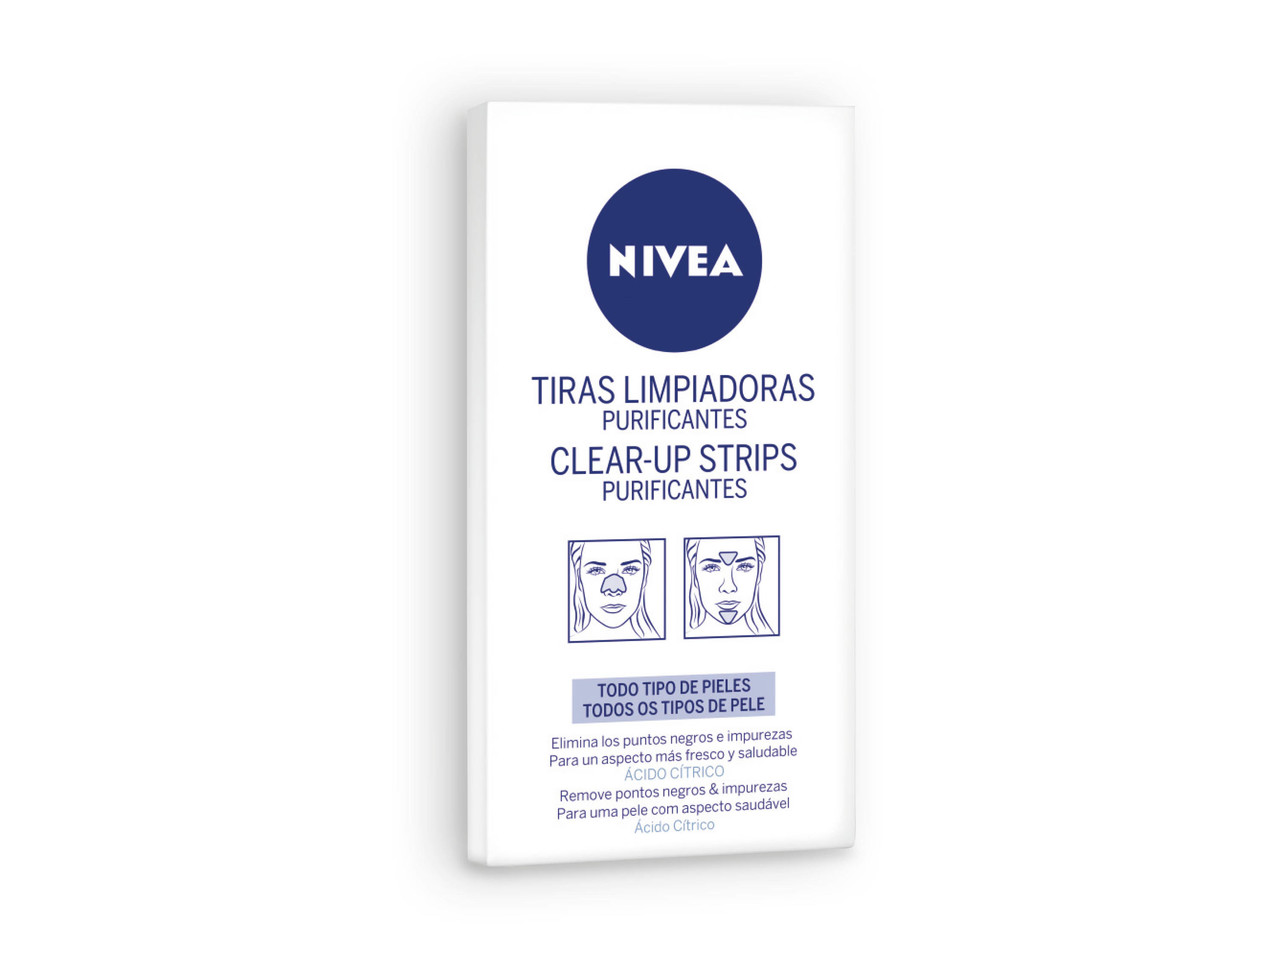 NIVEA(R) Clear-up Strips Purificantes